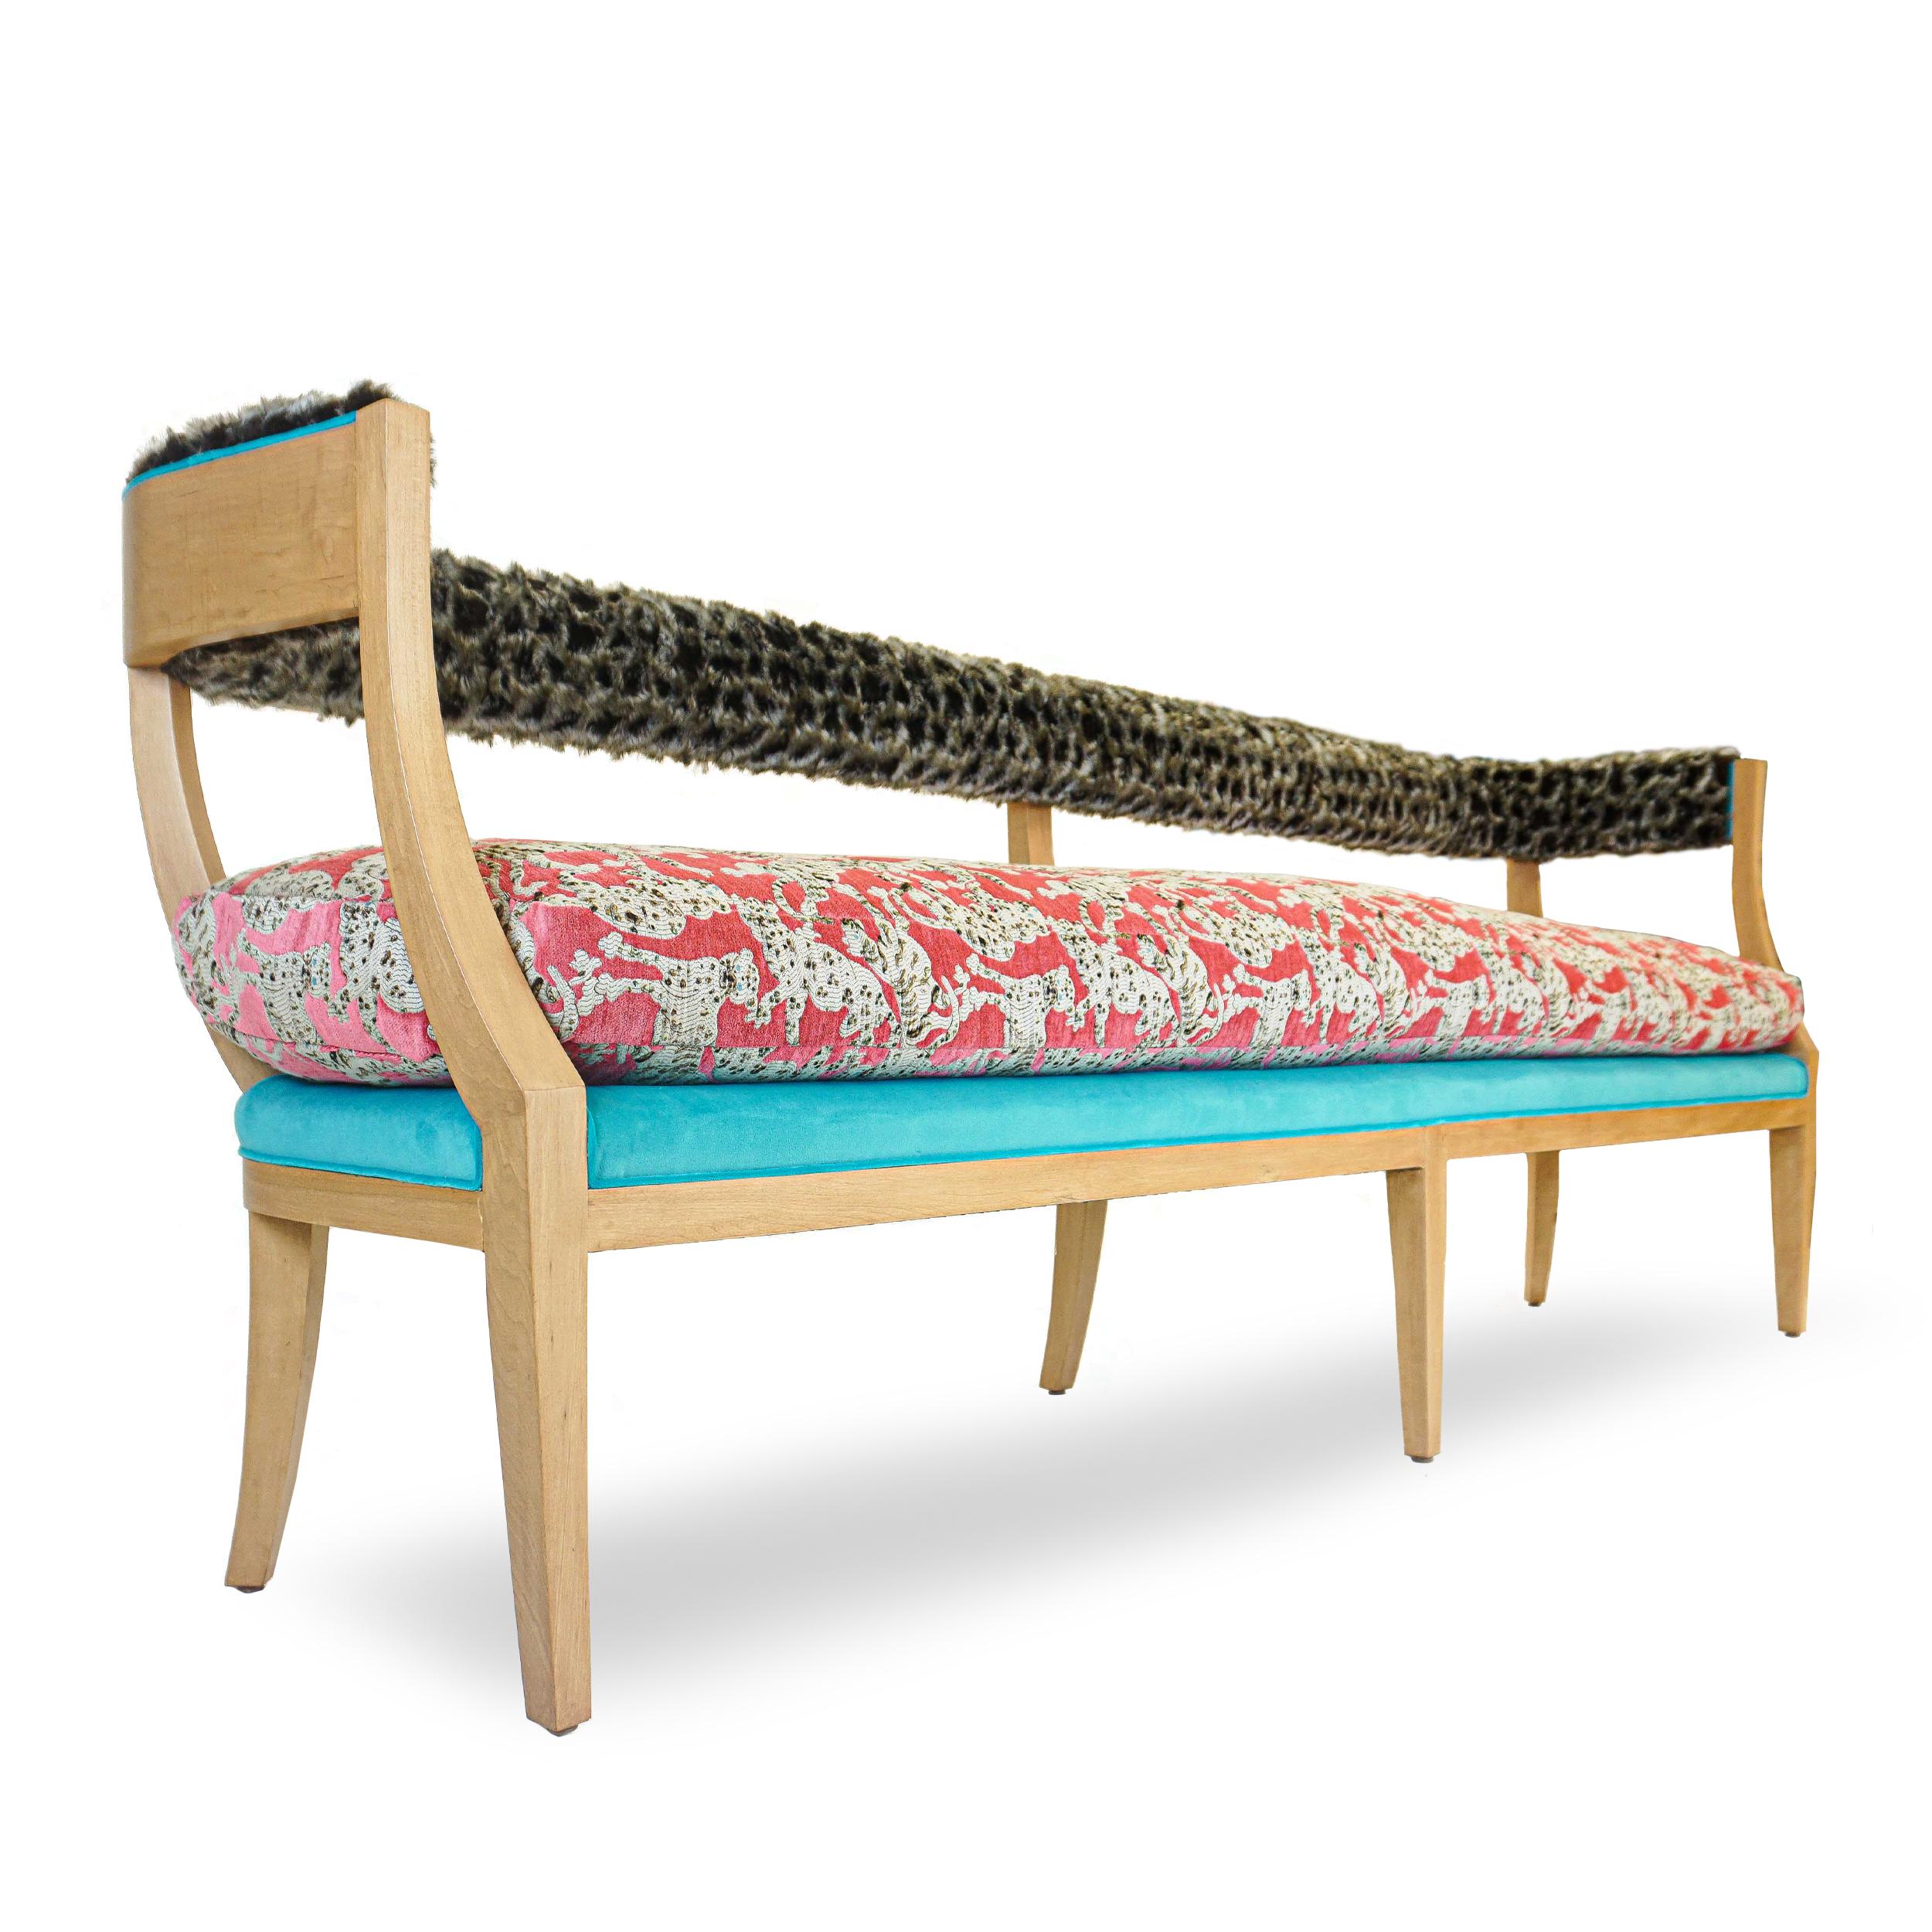 Japanese inspired bench in supple maple frame with matte finish is adorned with an unexpected mix of fabrics giving it a vibrant pop. Sink into a single oversized stuffed down feather seat cushion wrapped in Jim Thompson woven Cat's Pyjamas fabric.